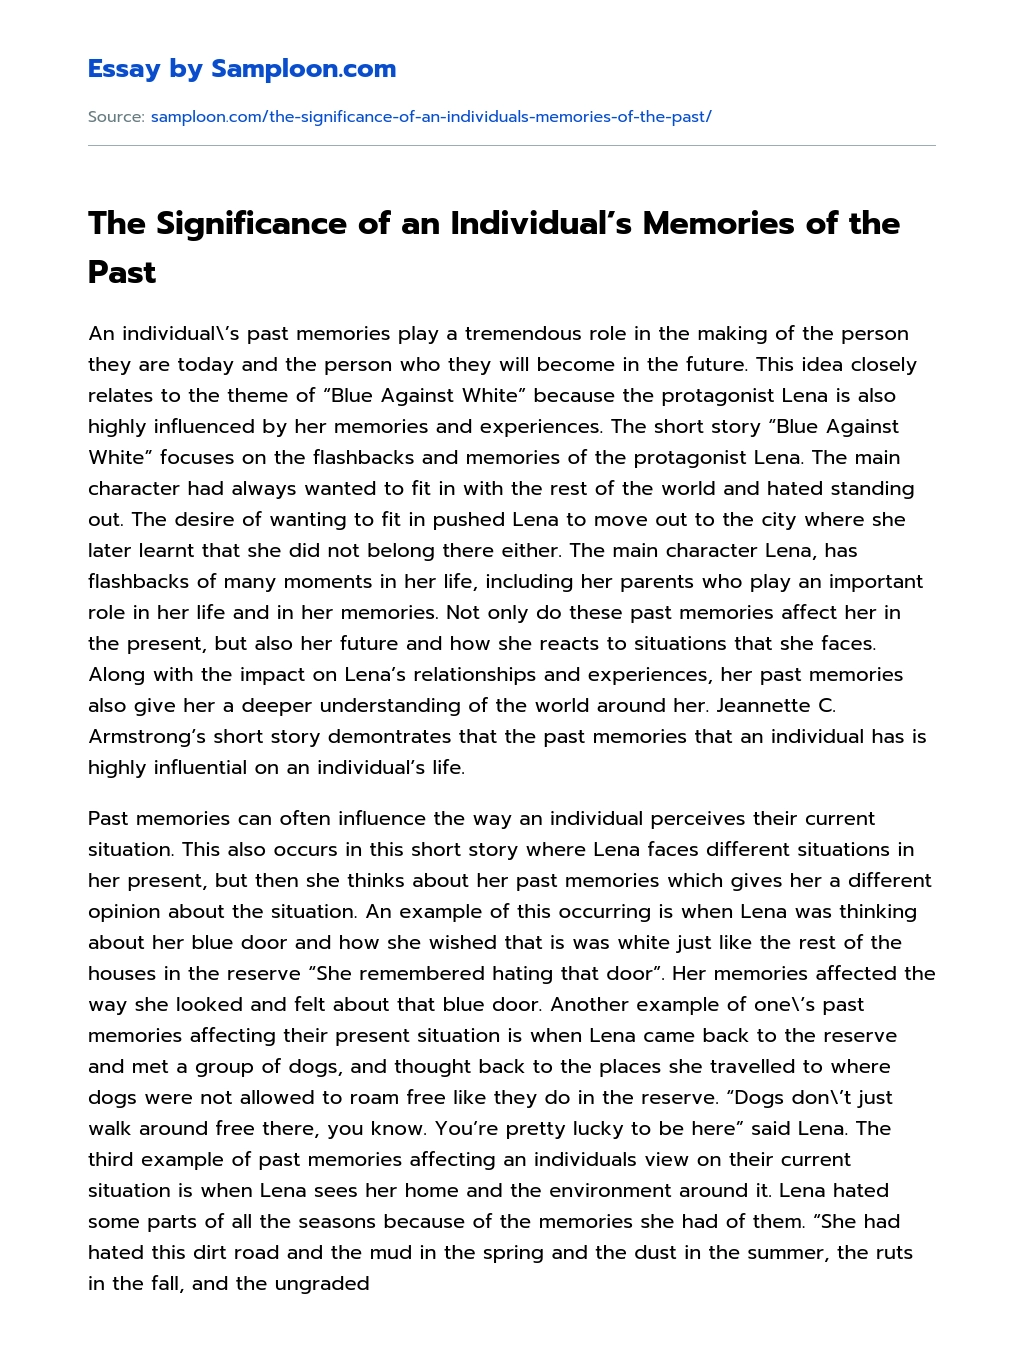 The Significance of an Individual’s Memories of the Past essay